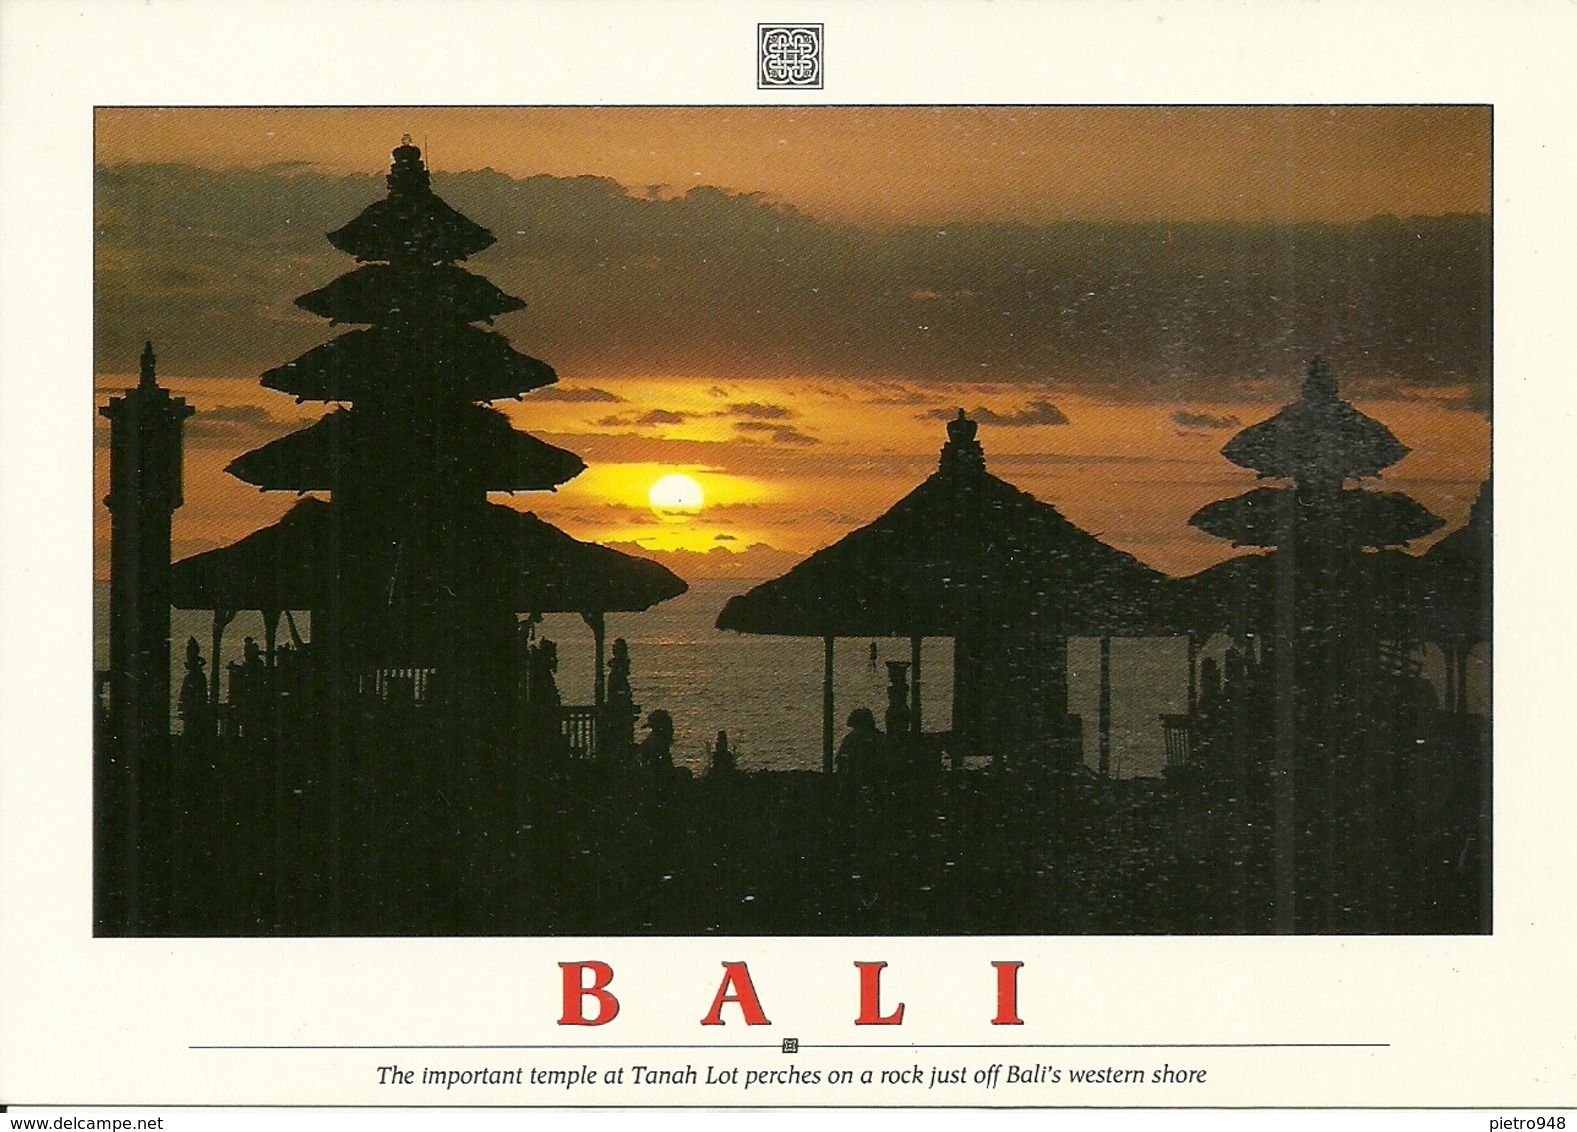 Bali (Indonesia) Temple At Tanah Lot Perches On A Rock Just Off Bali's Western Shore, Sunset, Tramonto, Coucher Du Solei - Indonesia